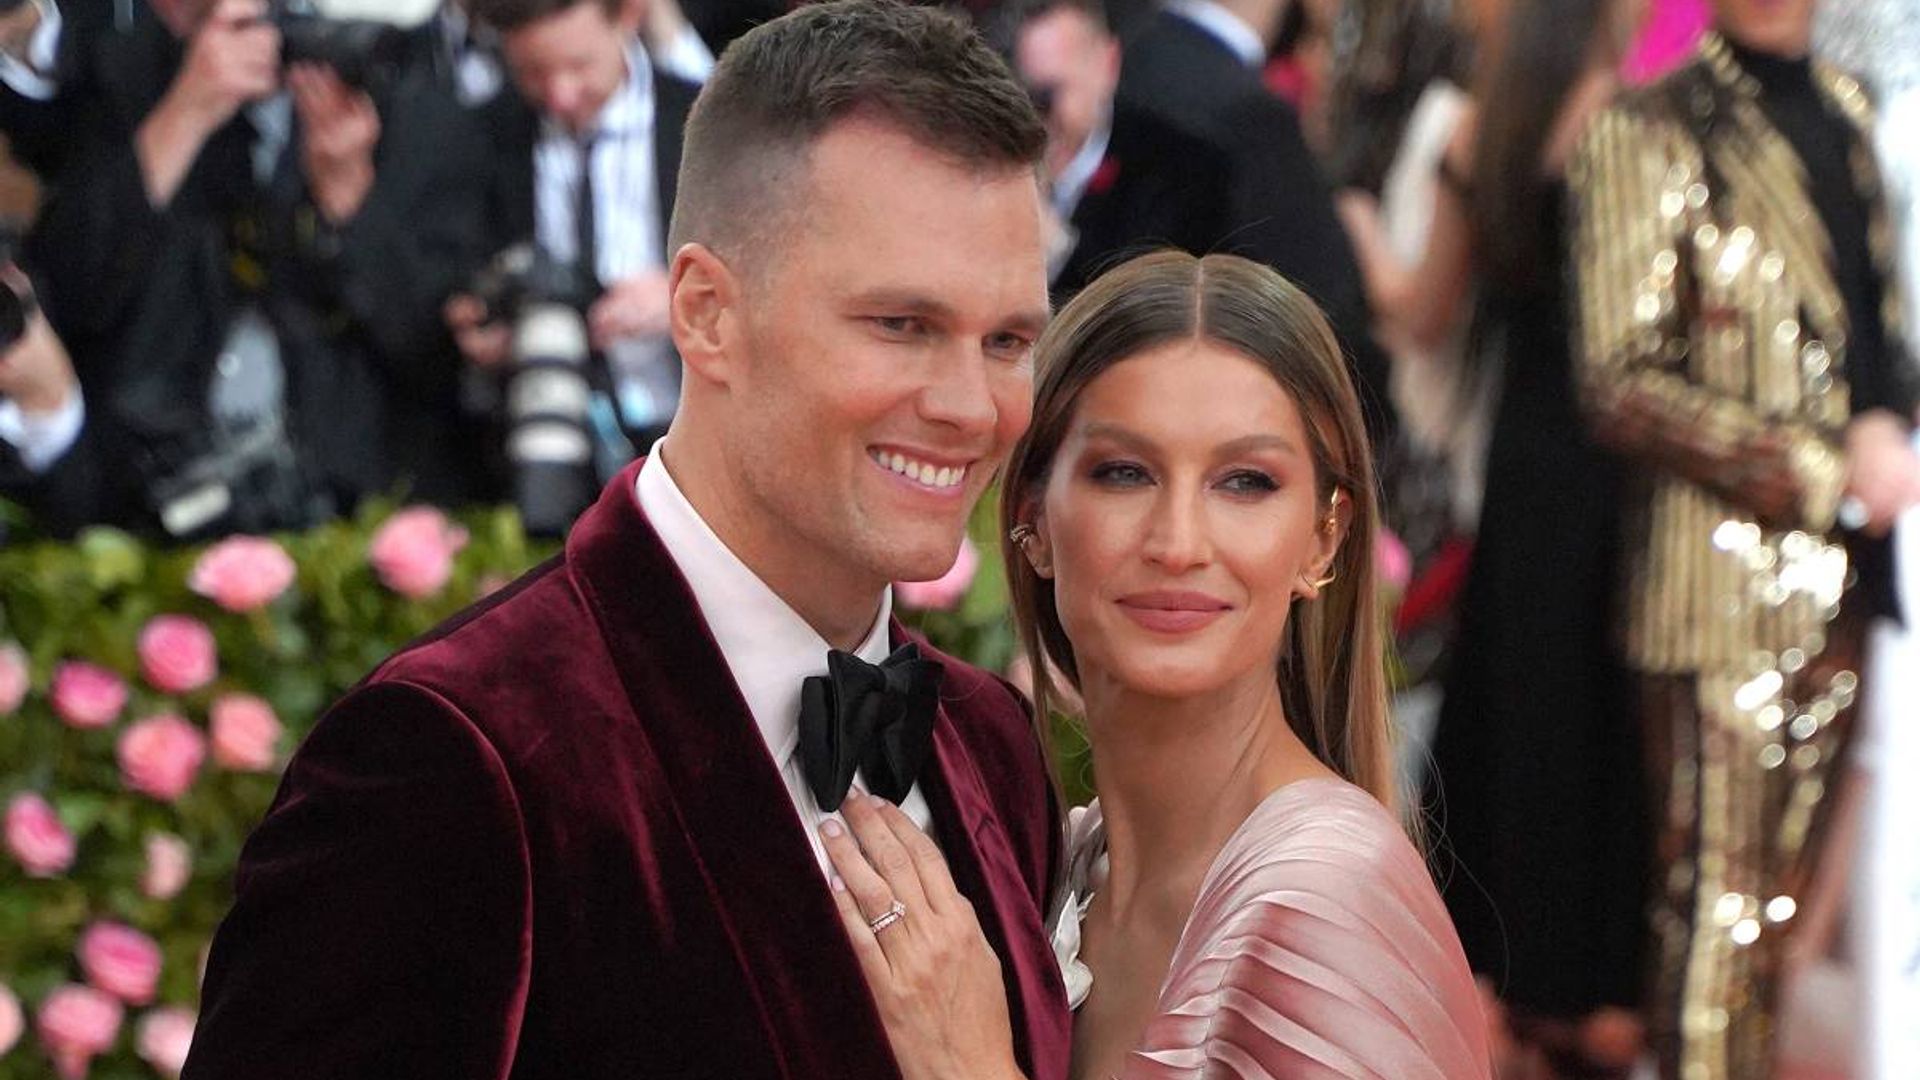 Tom Brady and Gisele Bundchen celebrate sweet milestone with tributes to one another